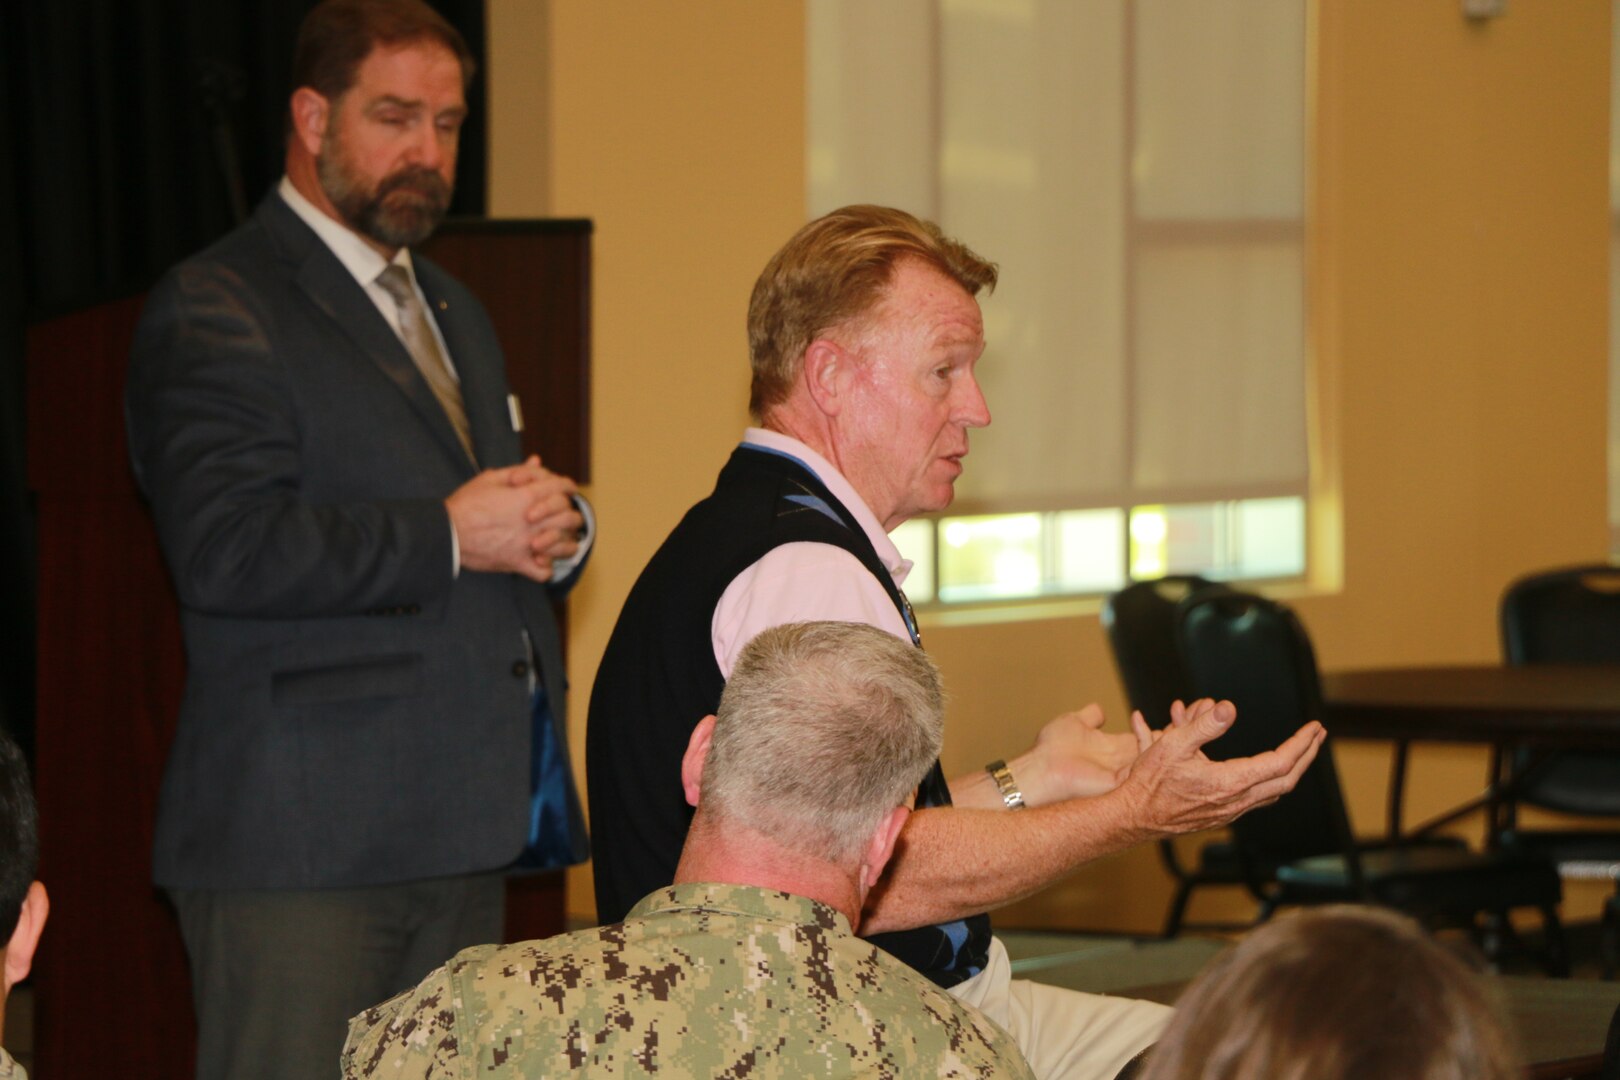 Mike Cannon, DLA Disposition Services director, pauses during his remarks as an attendee from Naval Air Station Jacksonville shares how DLA Disposition Services has helped clean out excess property from his building and continues to offer support.